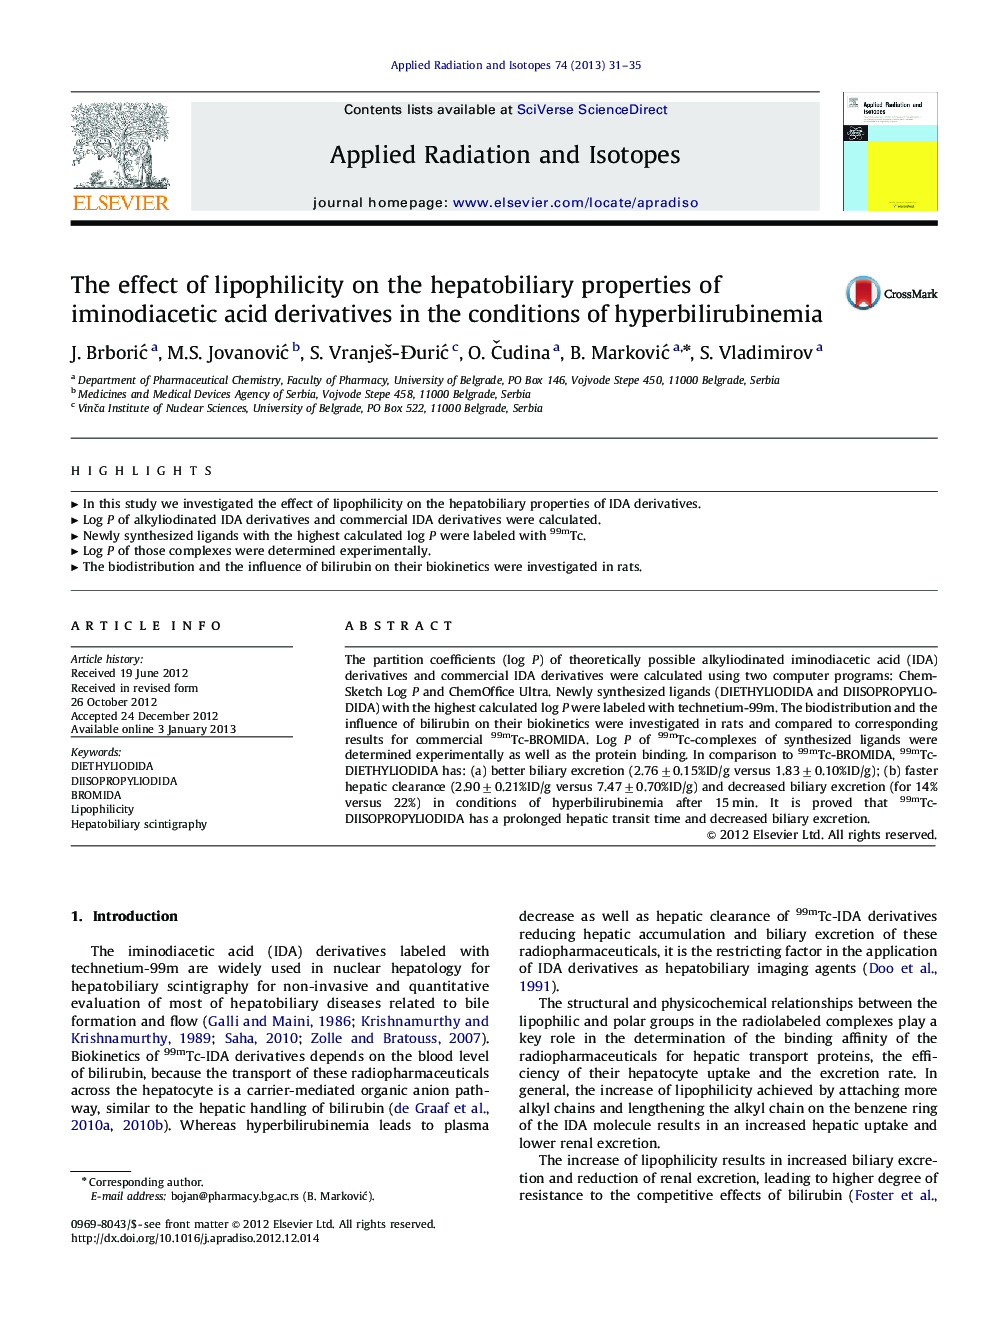 The effect of lipophilicity on the hepatobiliary properties of iminodiacetic acid derivatives in the conditions of hyperbilirubinemia